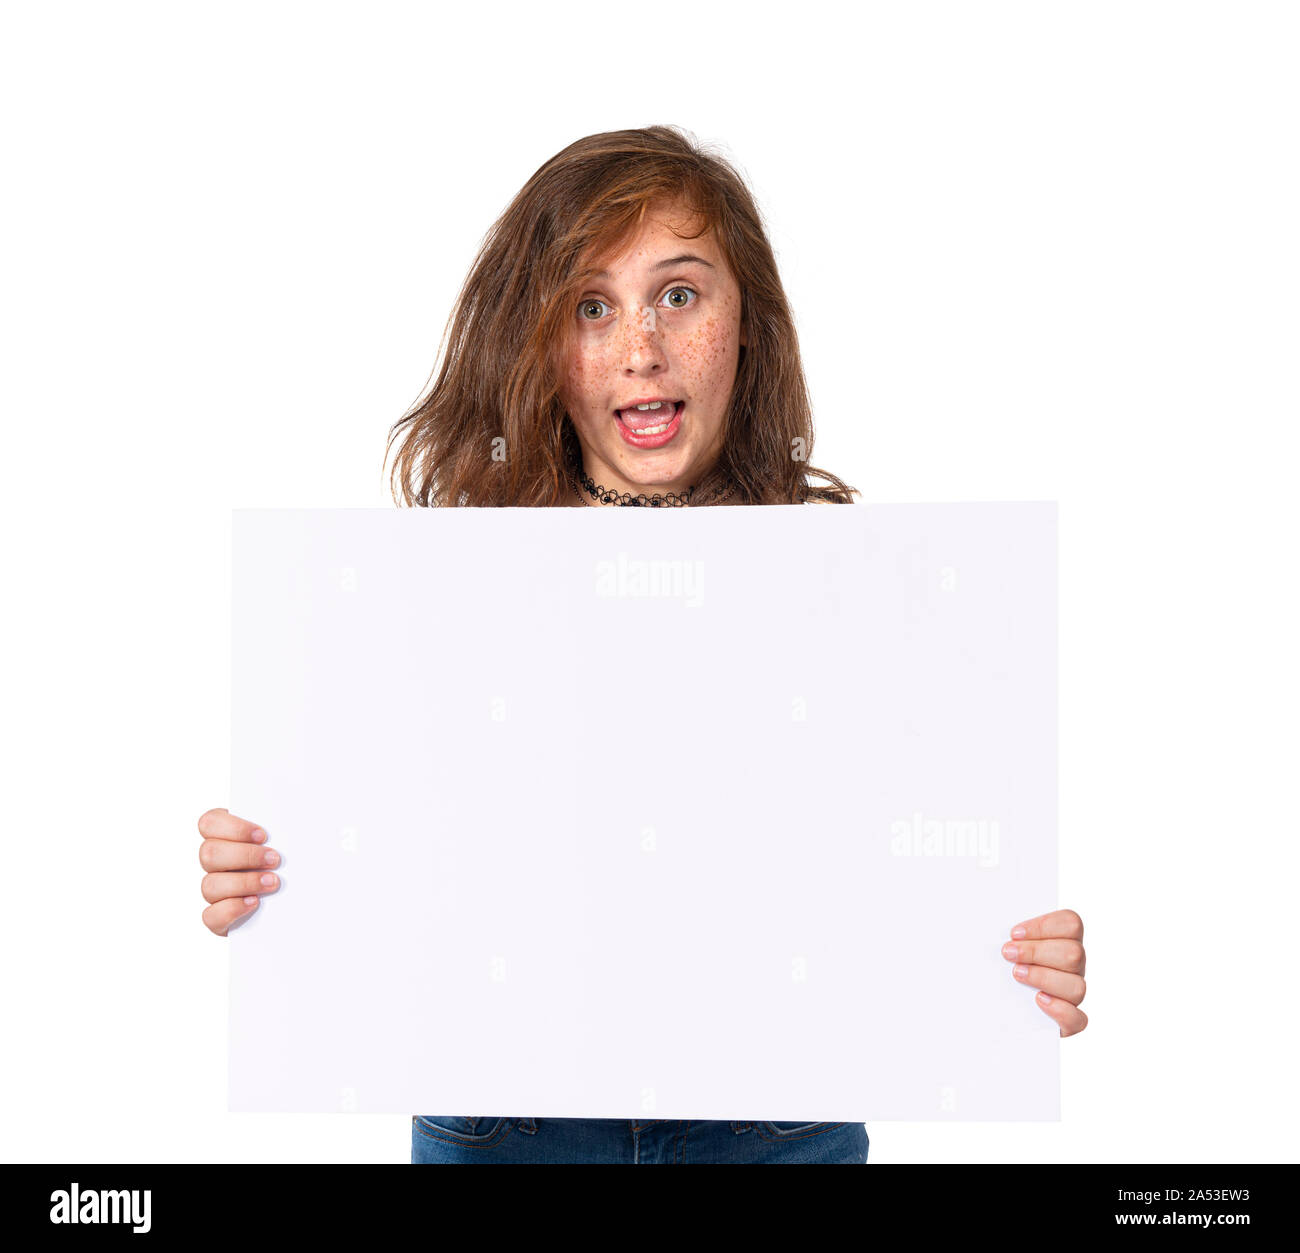 Horizontal studio shot of a talking pre-teen girl holding a blank white sign in front of her.  Isolated on white.  Copy space. Stock Photo